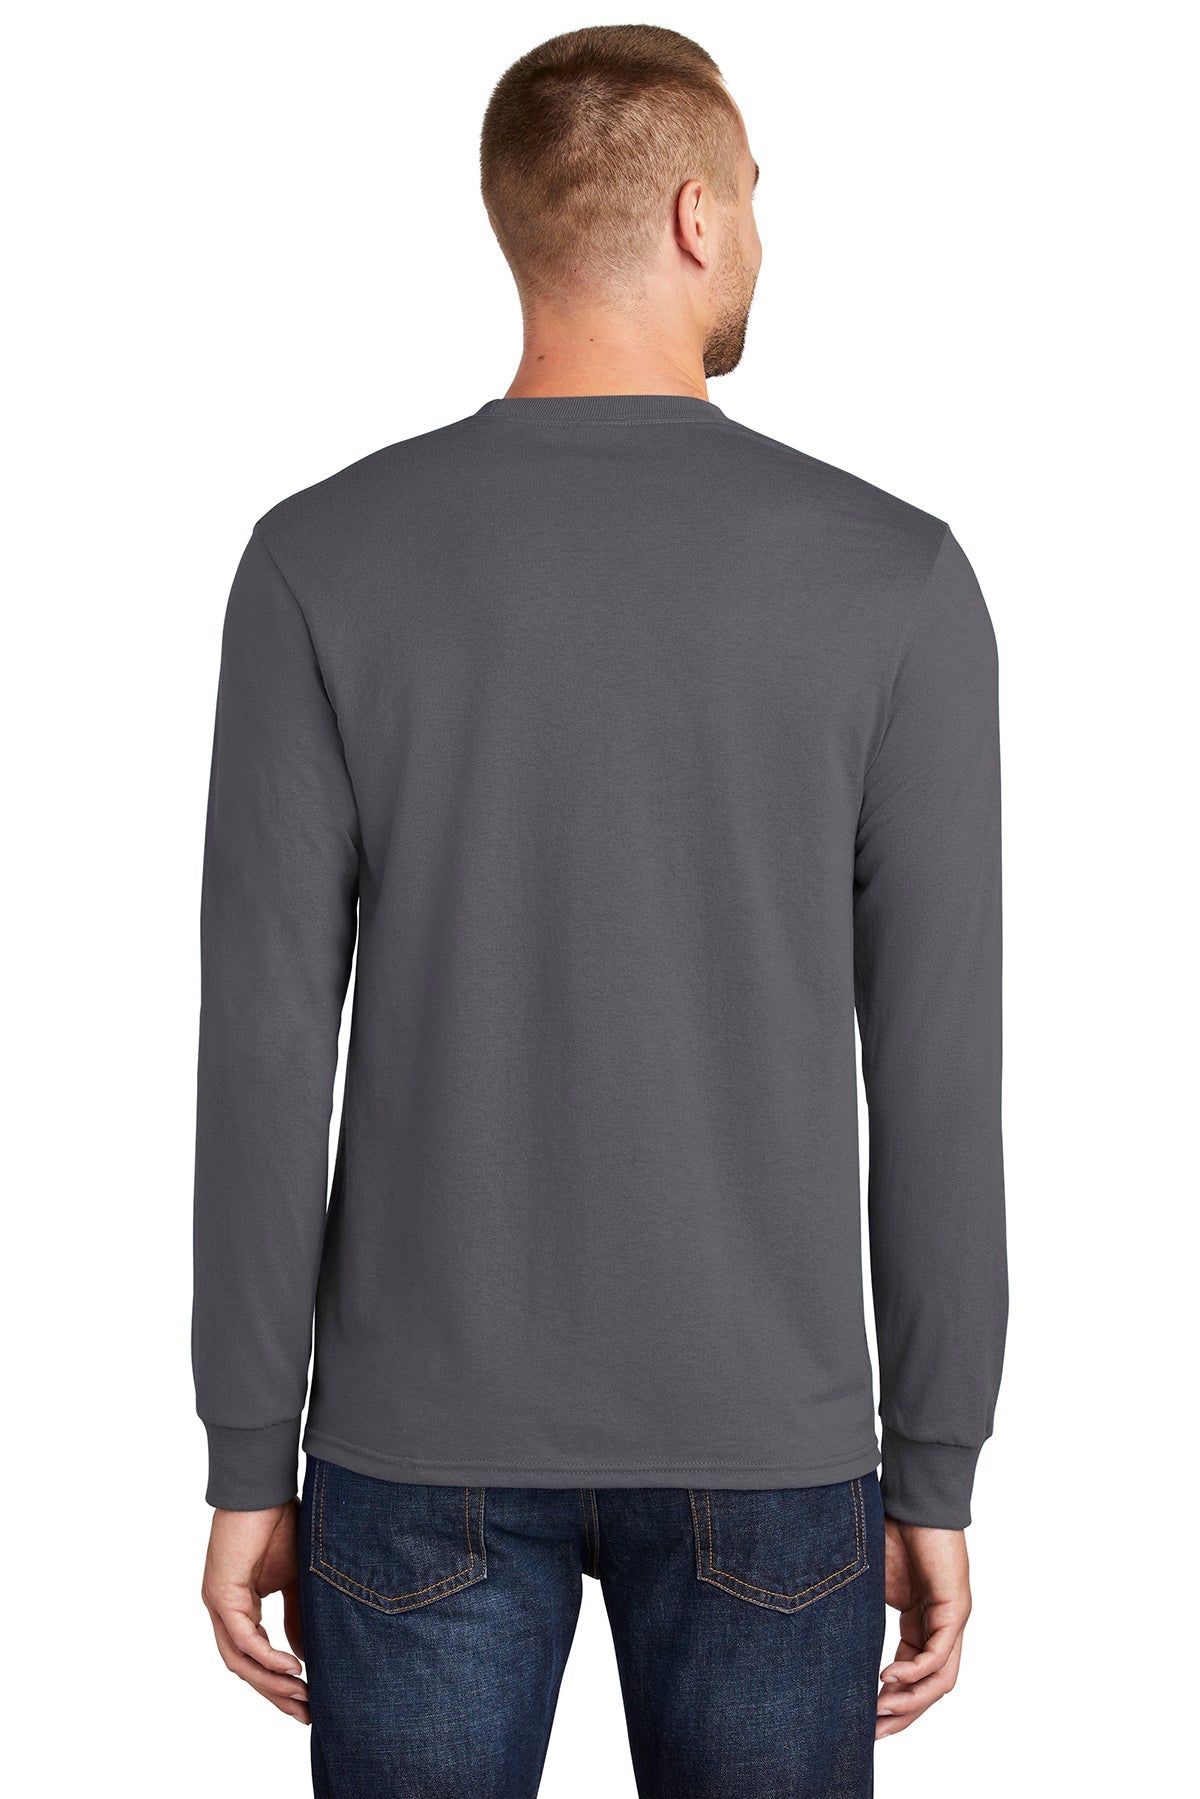 Port & Company Tall Long Sleeve Branded Core Blend Tee's, Charcoal